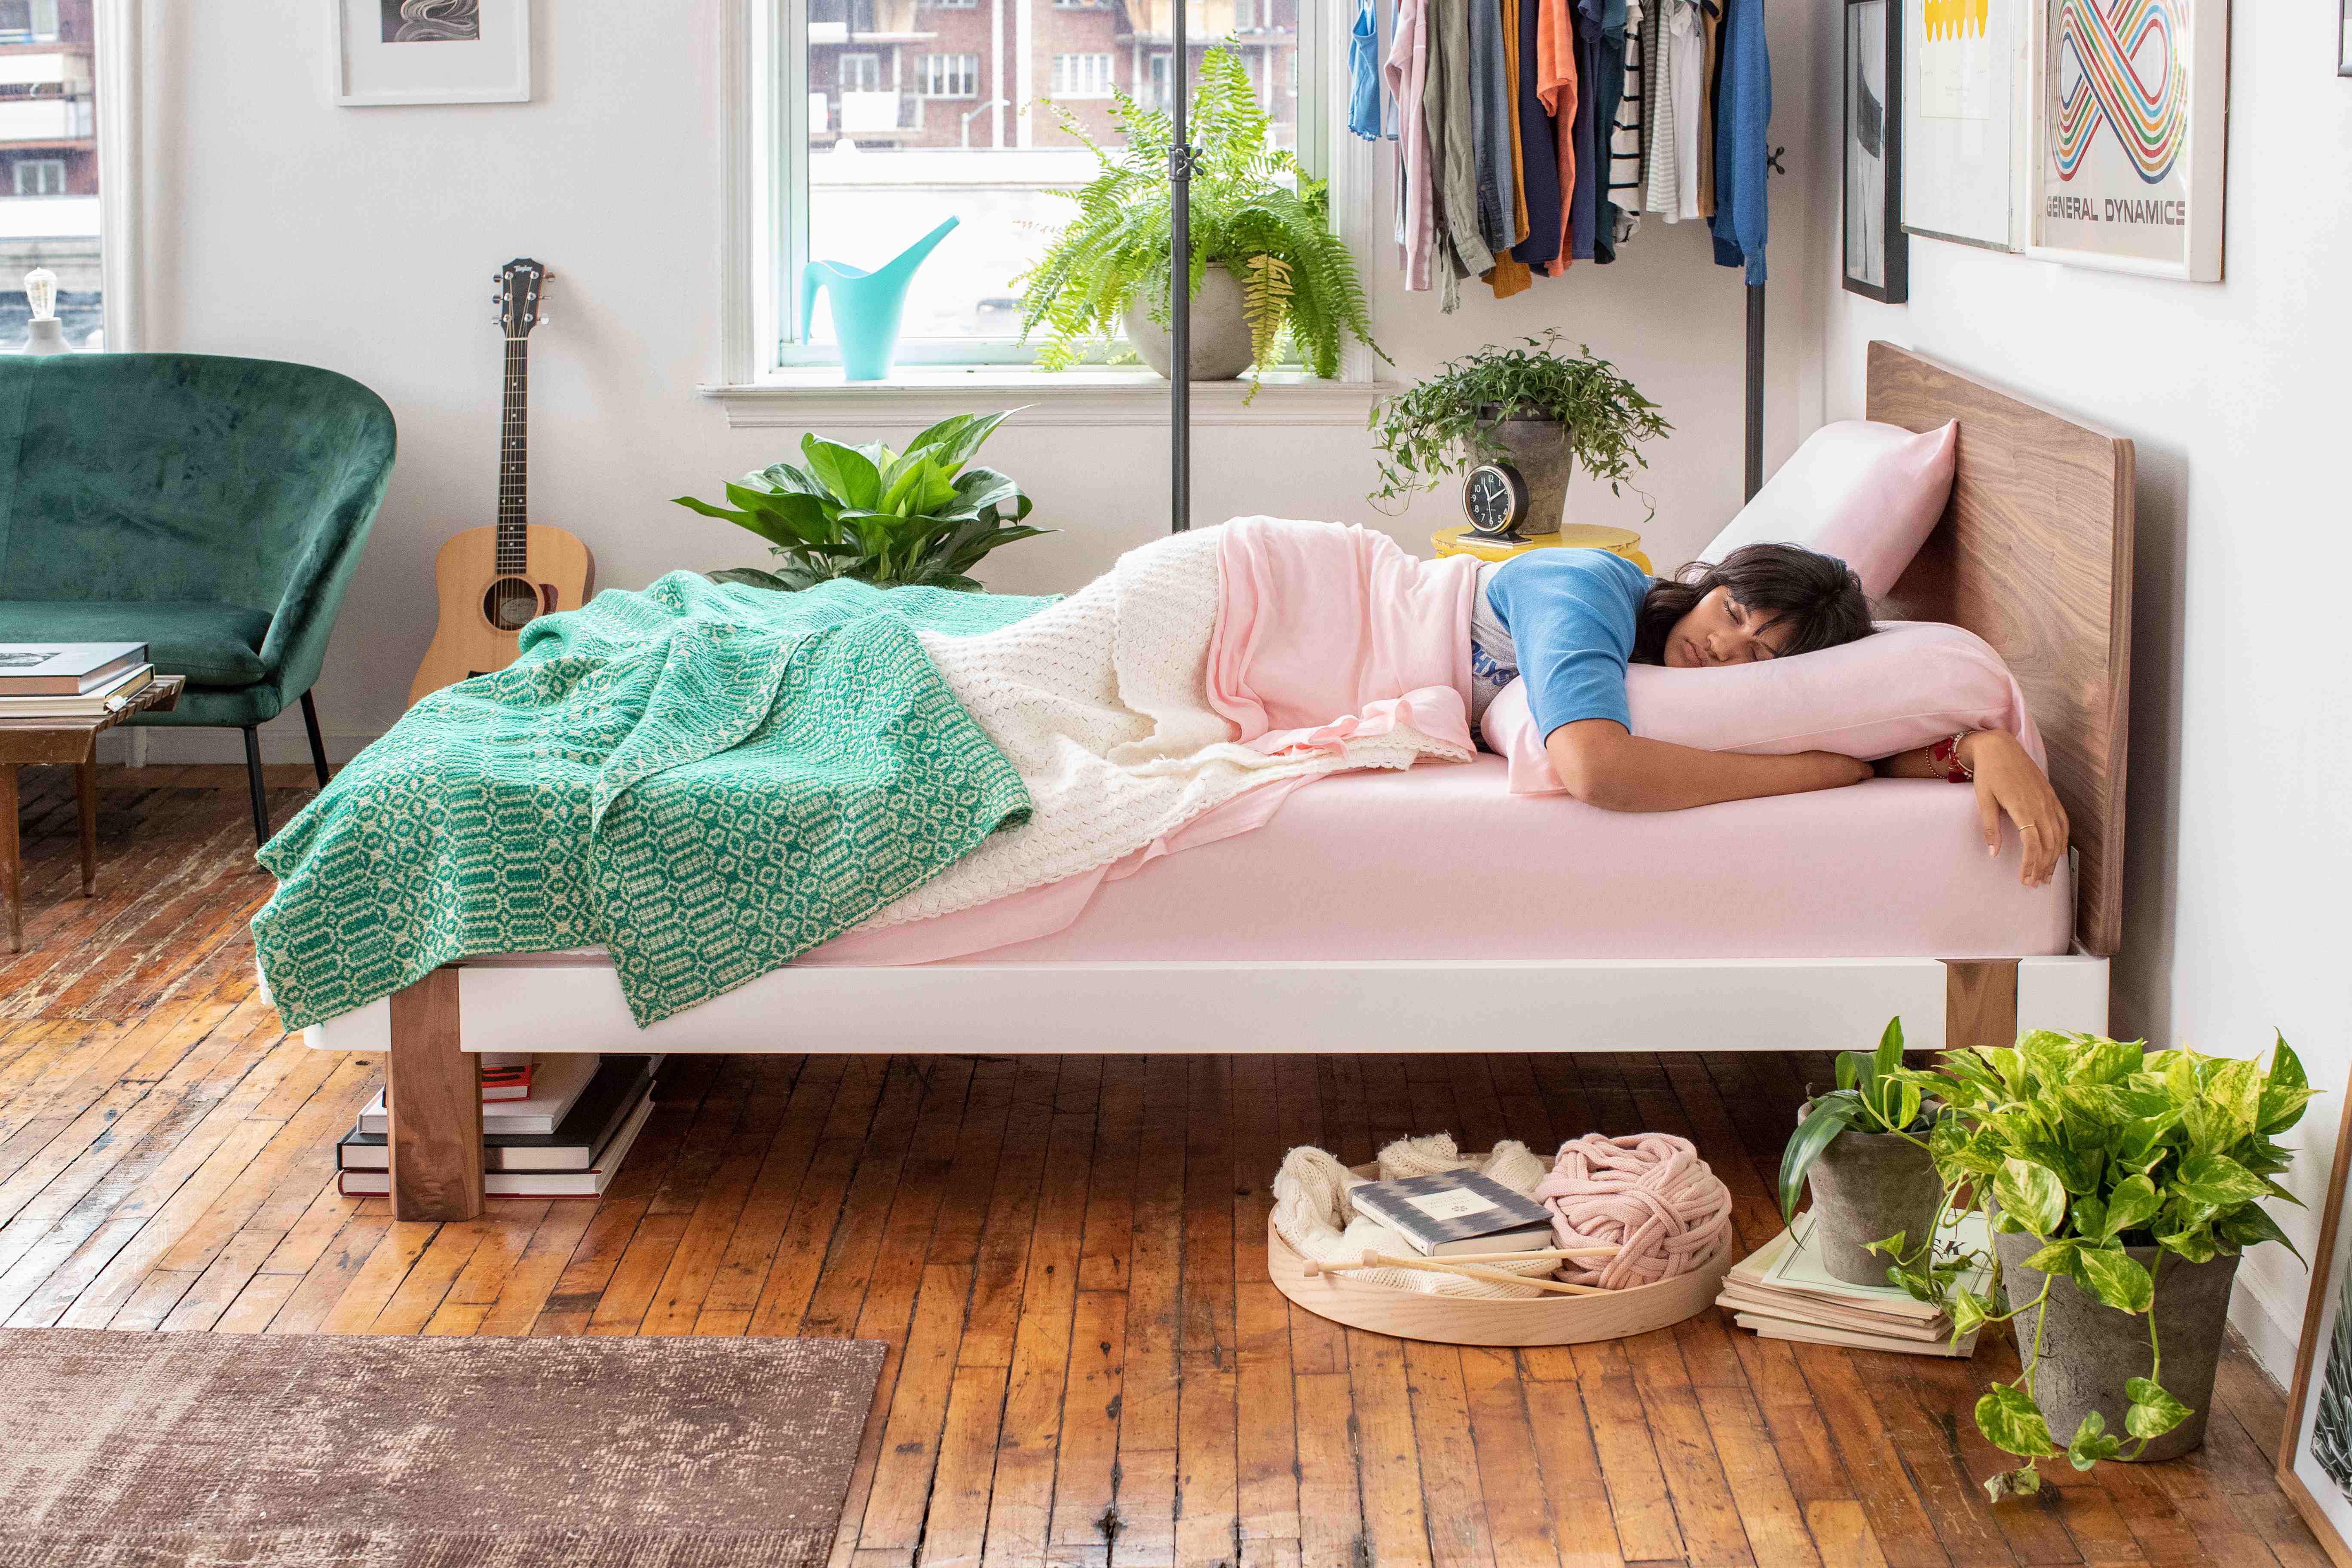 Woman sleeping on a Tuft & Needle Original mattress on her side in her bedroom with plants, clothes and a guitar